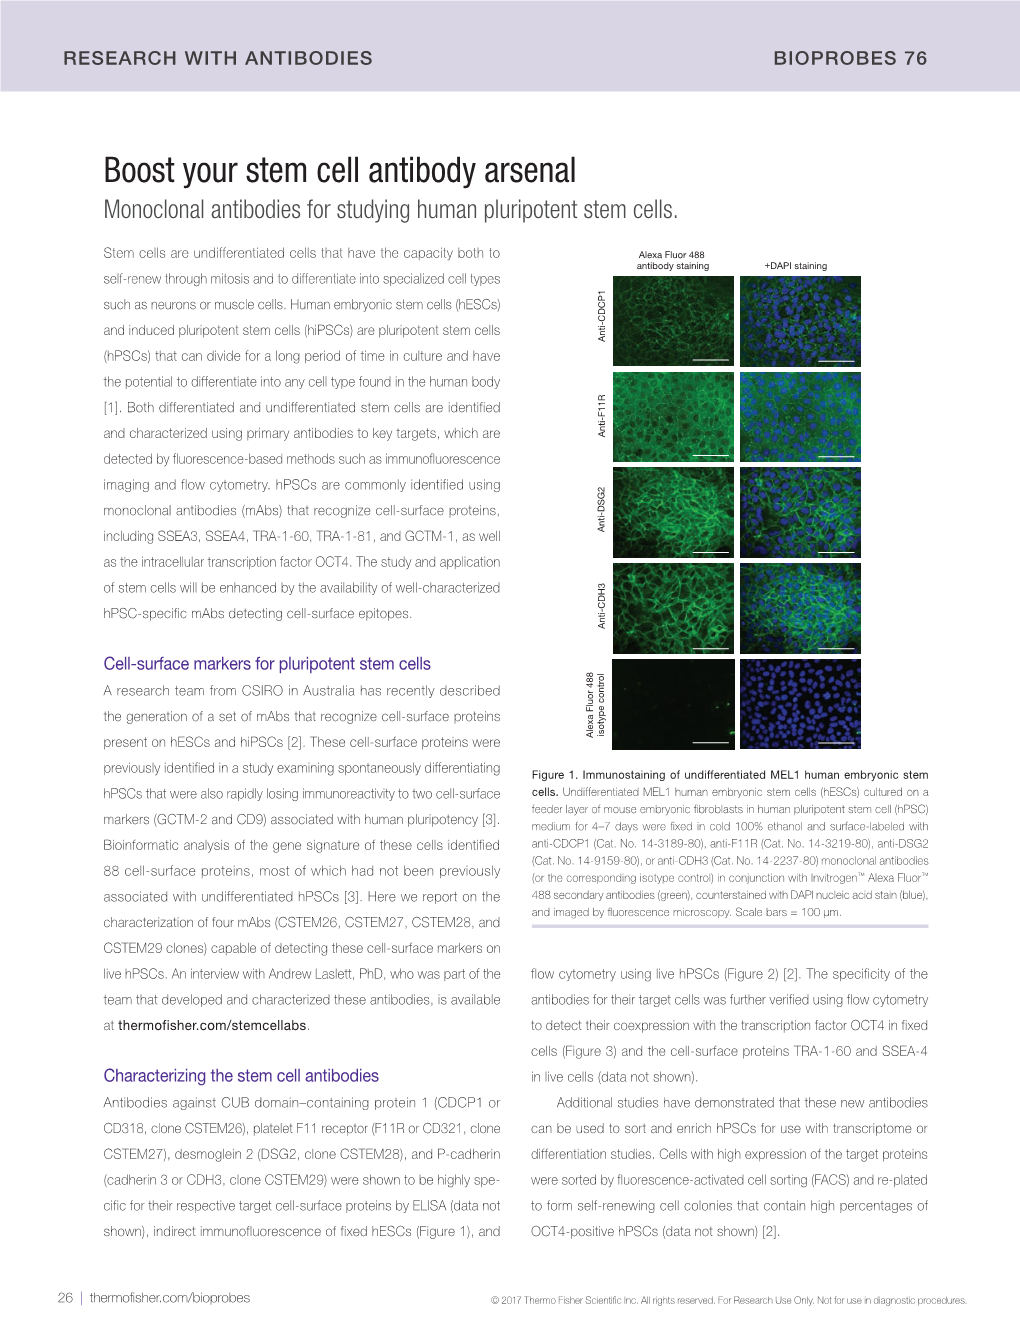 Boost Your Stem Cell Antibody Arsenal Monoclonal Antibodies for Studying Human Pluripotent Stem Cells